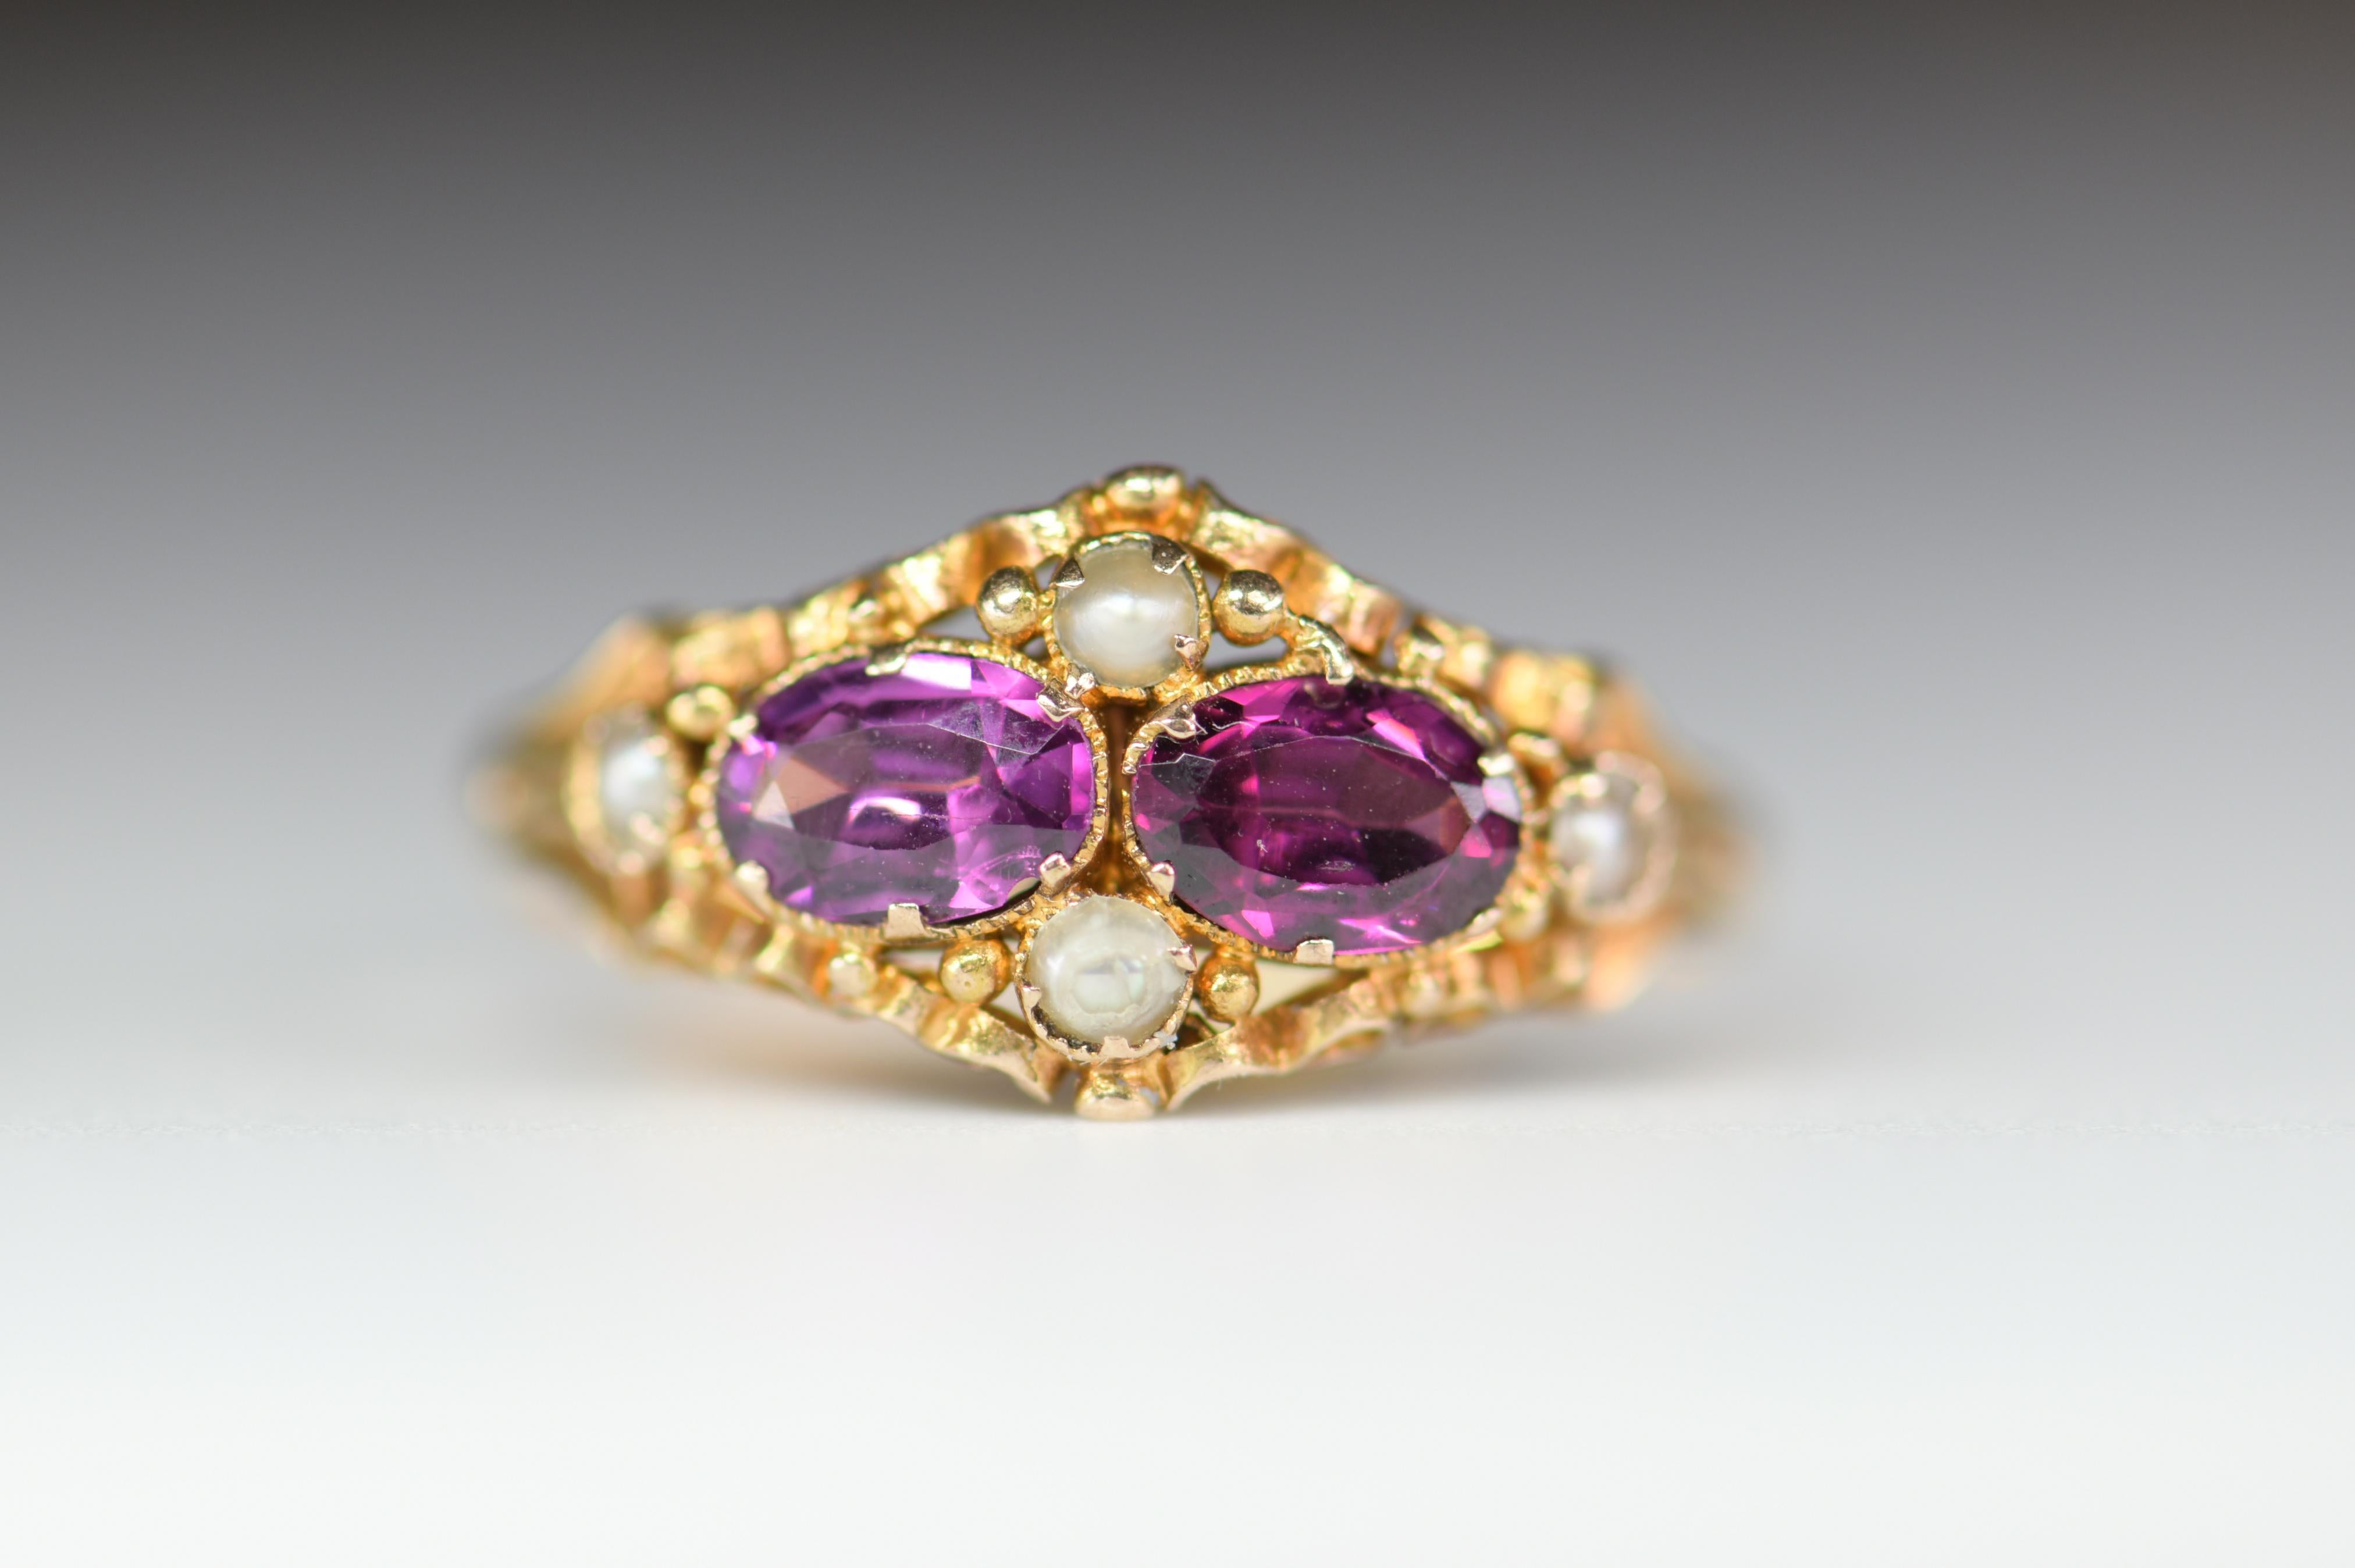 This beautiful Victorian English ring features two amethysts accented with seed pearls set in 15KT gold. Amethyst is a calming stone, which promotes balance and peace. Circa Birmingham 1865.

The 15 and .625 stamps show that it is 15K gold and that